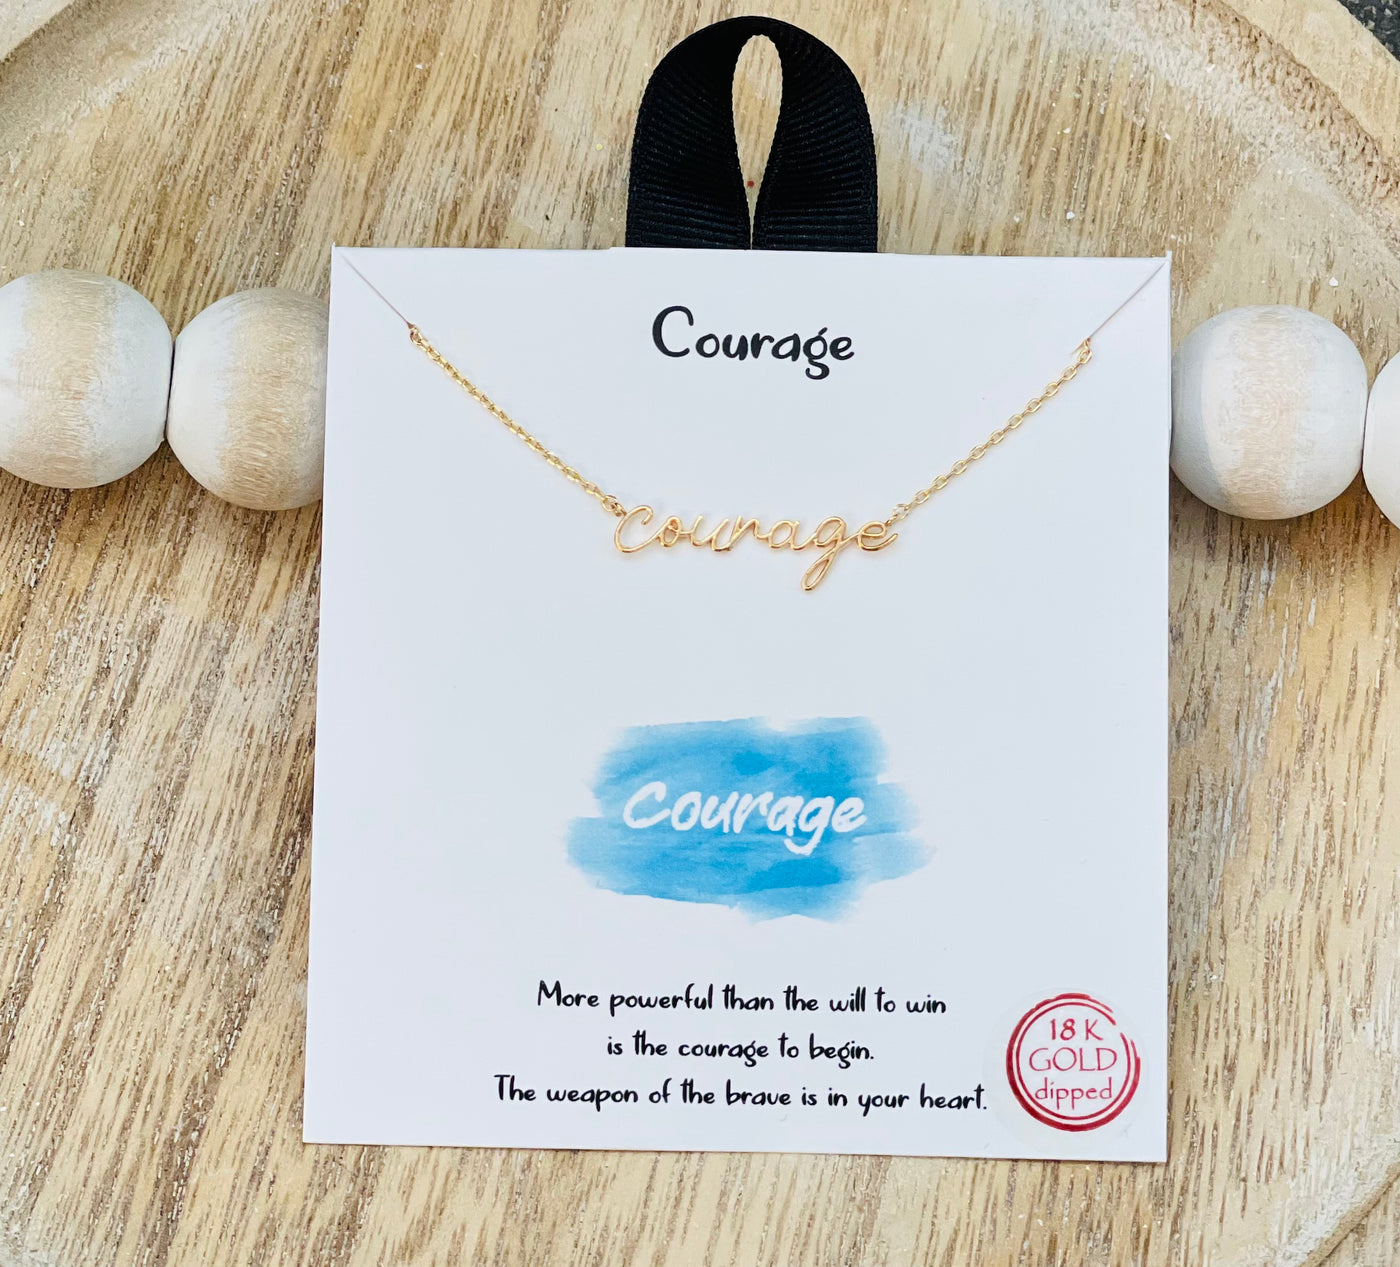 The Courage Necklace